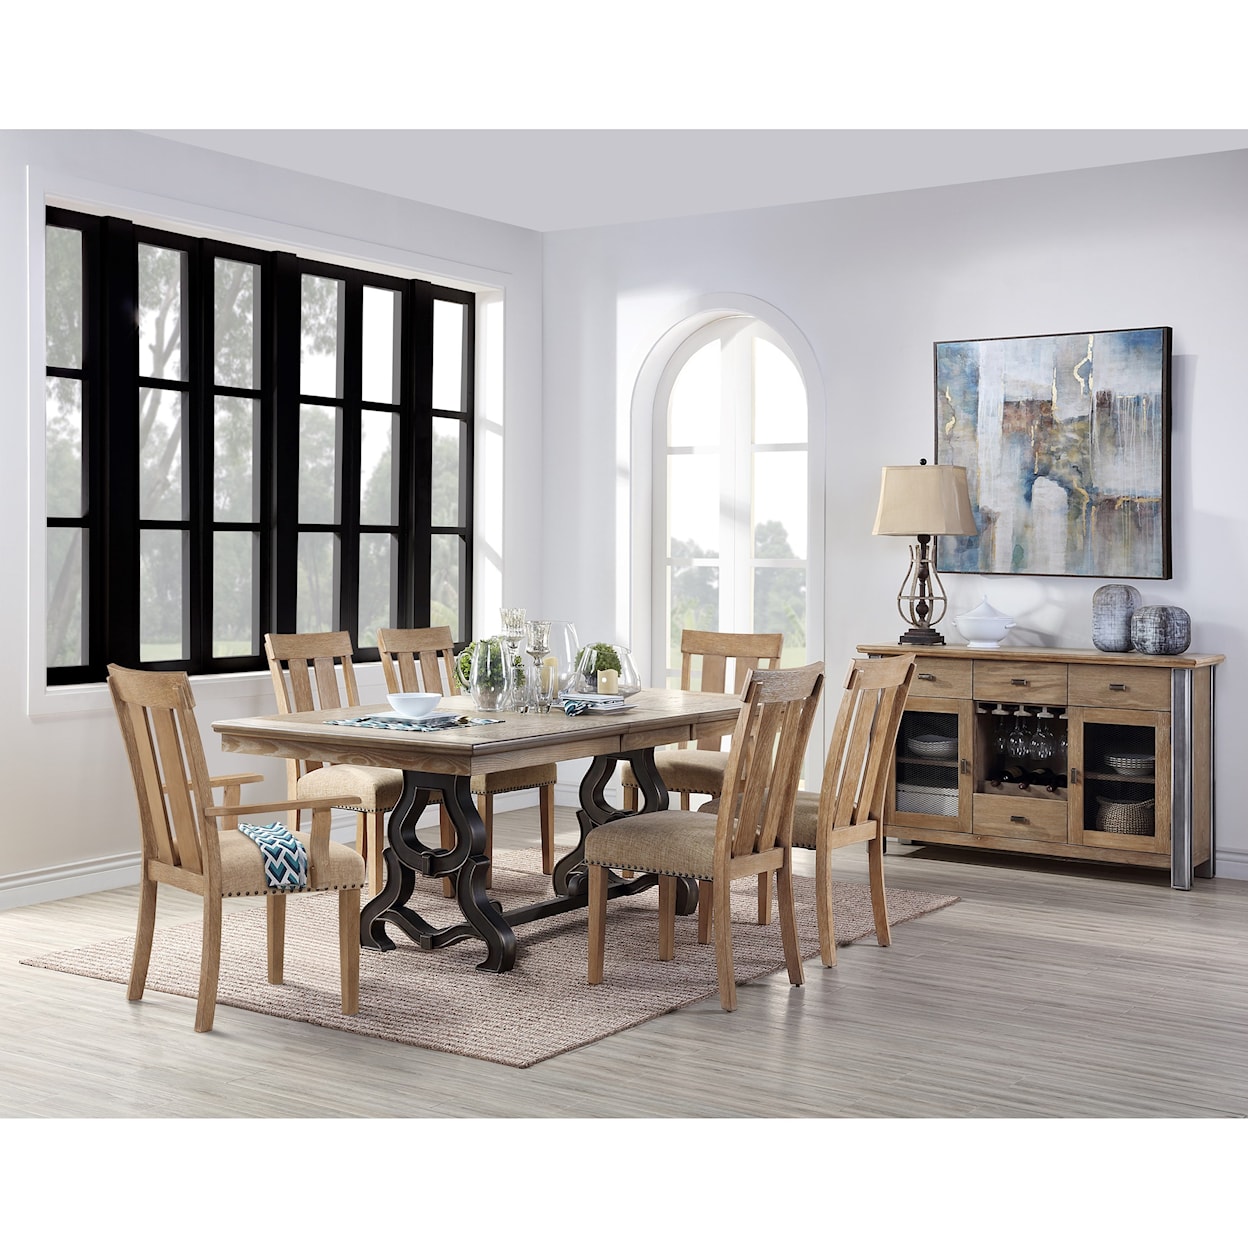 Acme Furniture Nathaniel Formal Dining Room Group